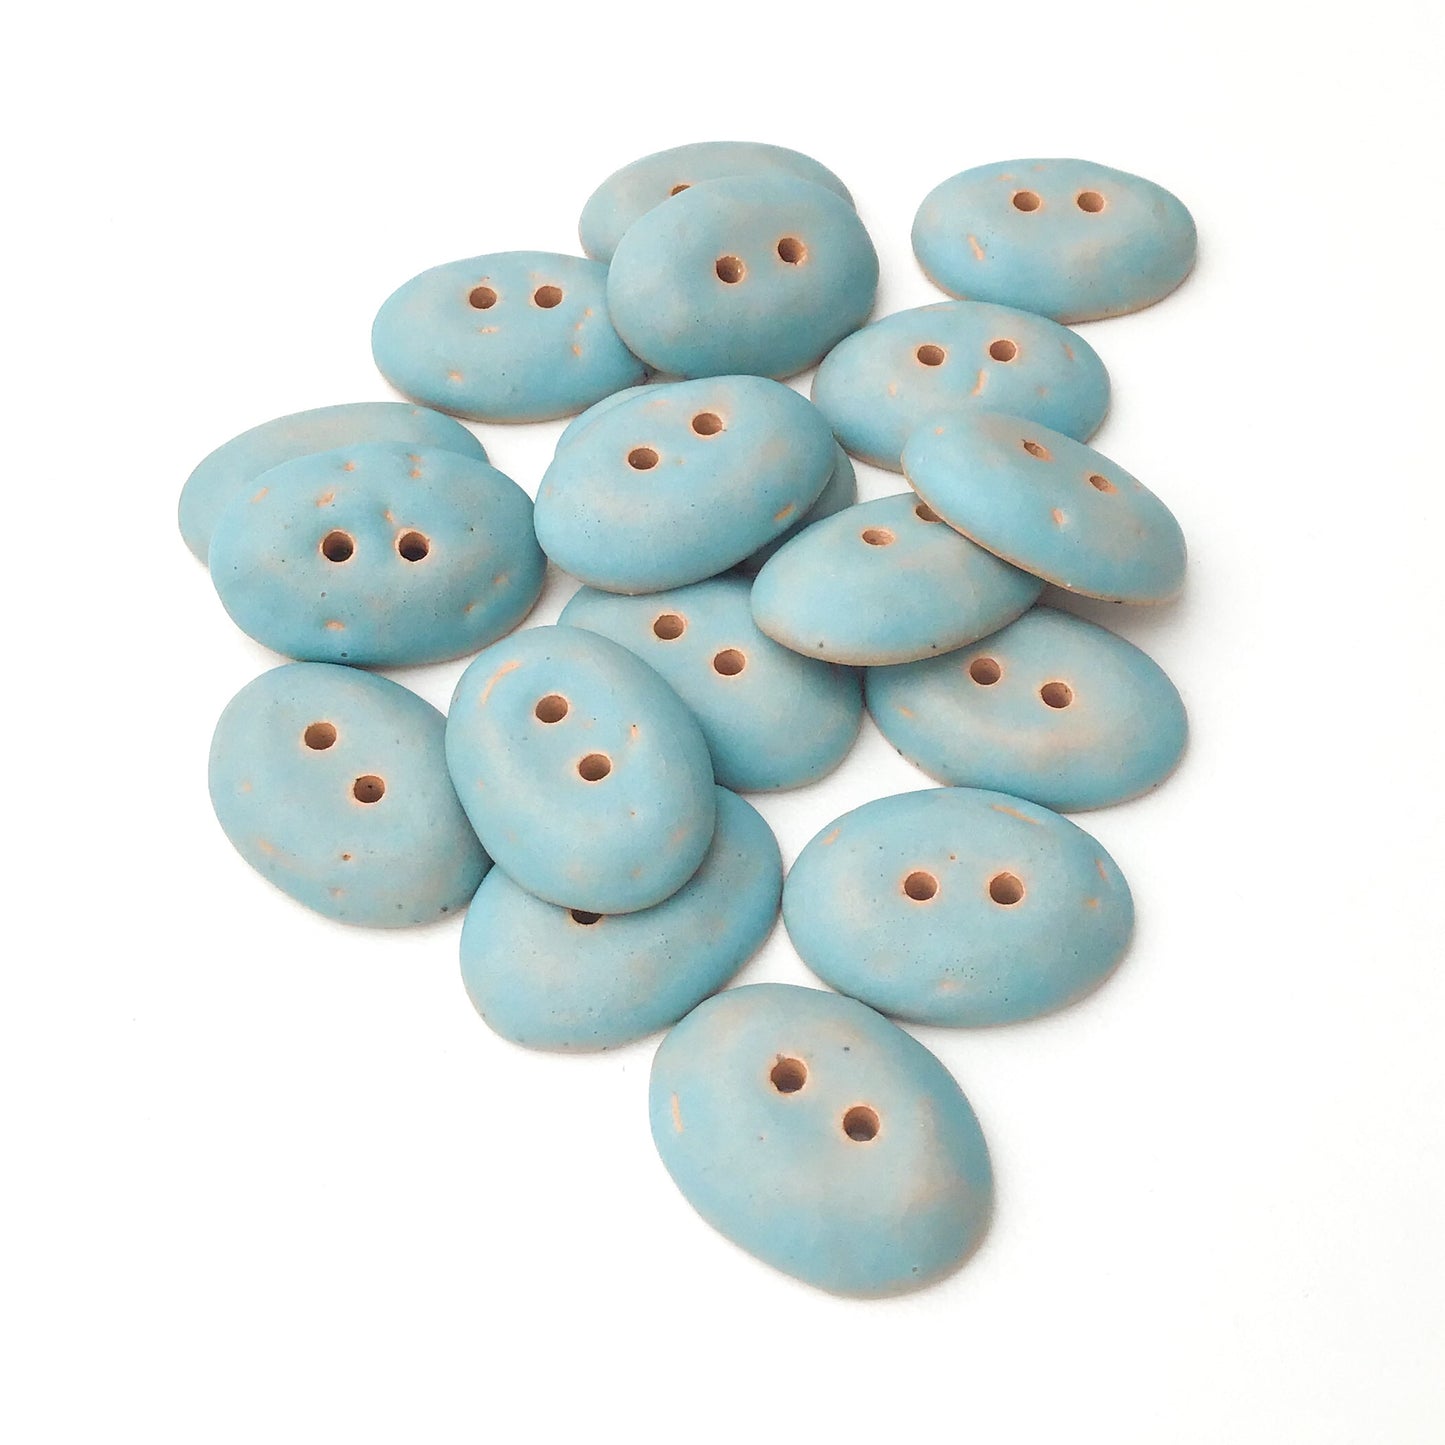 Robin's Egge Blue Oval Clay Buttons - Matte Glazed - 11/16" x 15/16"